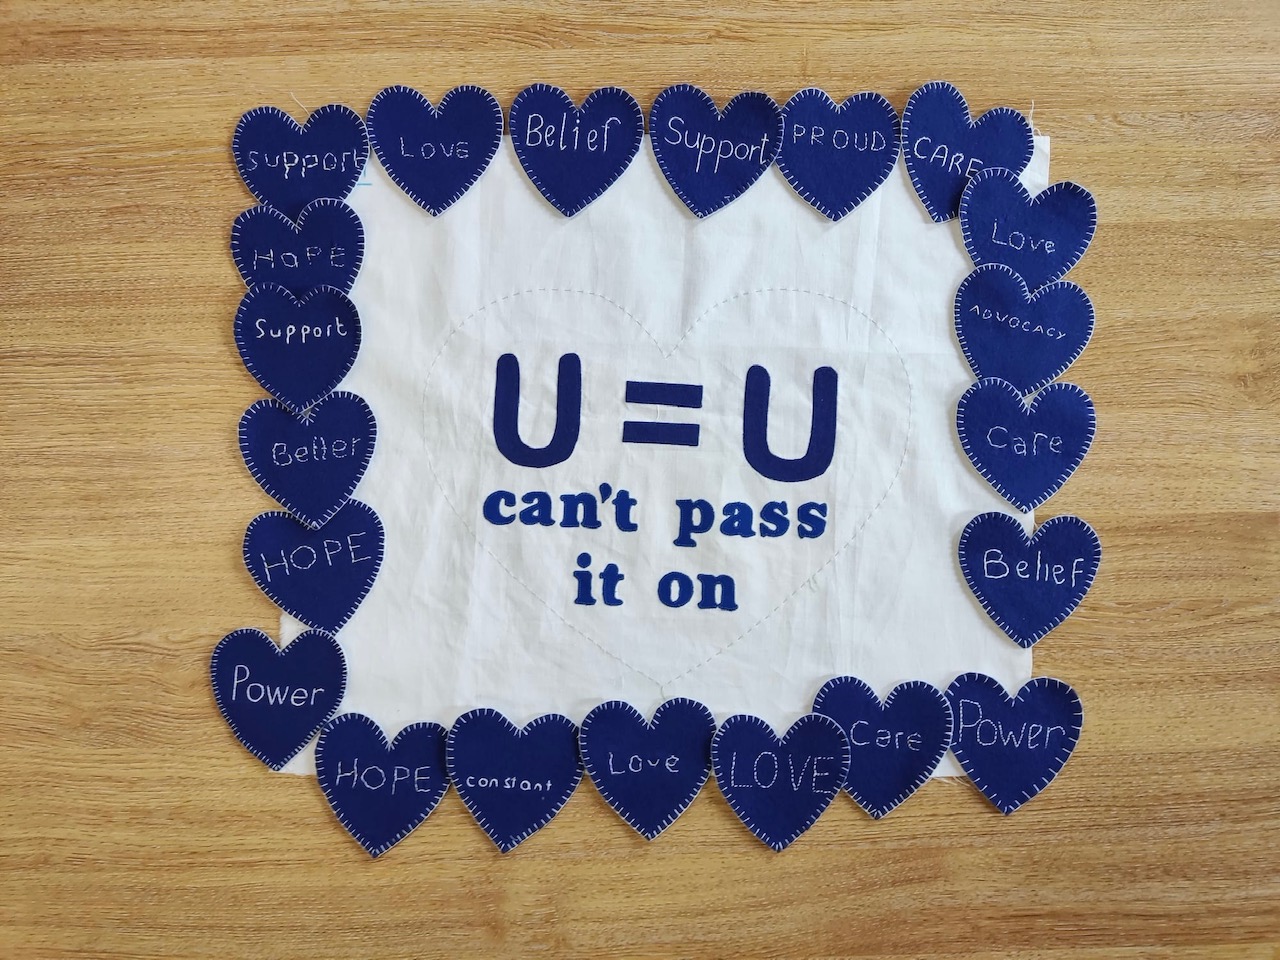 Terry Higgins Memorial Quilt panel piece reading "U=U can't pass it on" surrounded in blue hearts, photo credited to credit @handmadebygeraldine and @sarahashfordstudio 